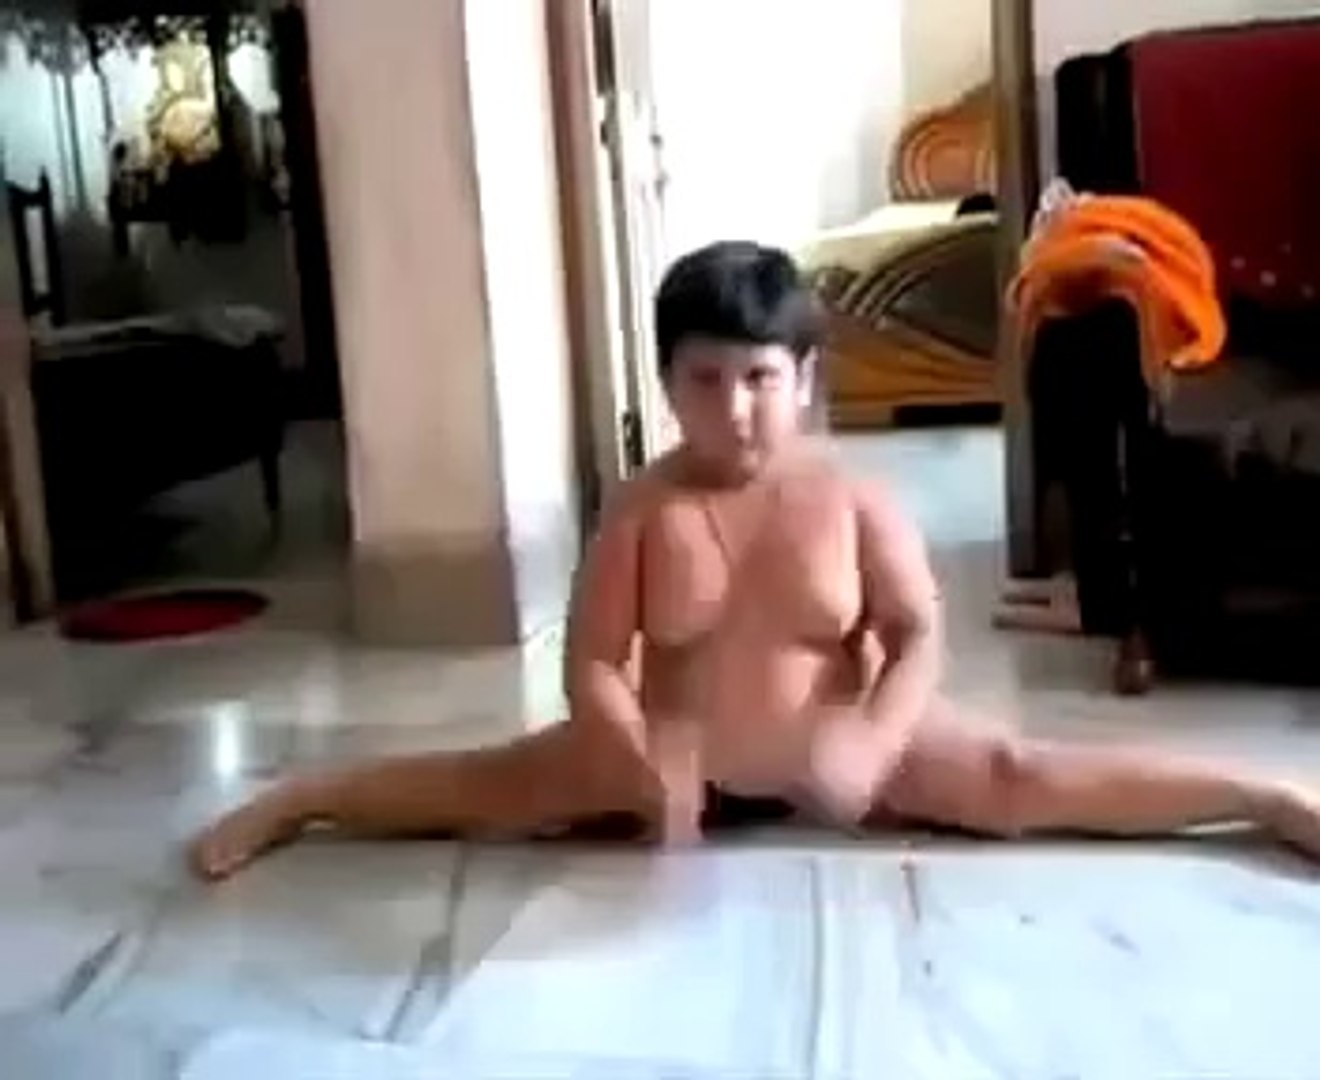 OMG Funniest Video EVER! - Chubby Indian Kid Dancing LOL